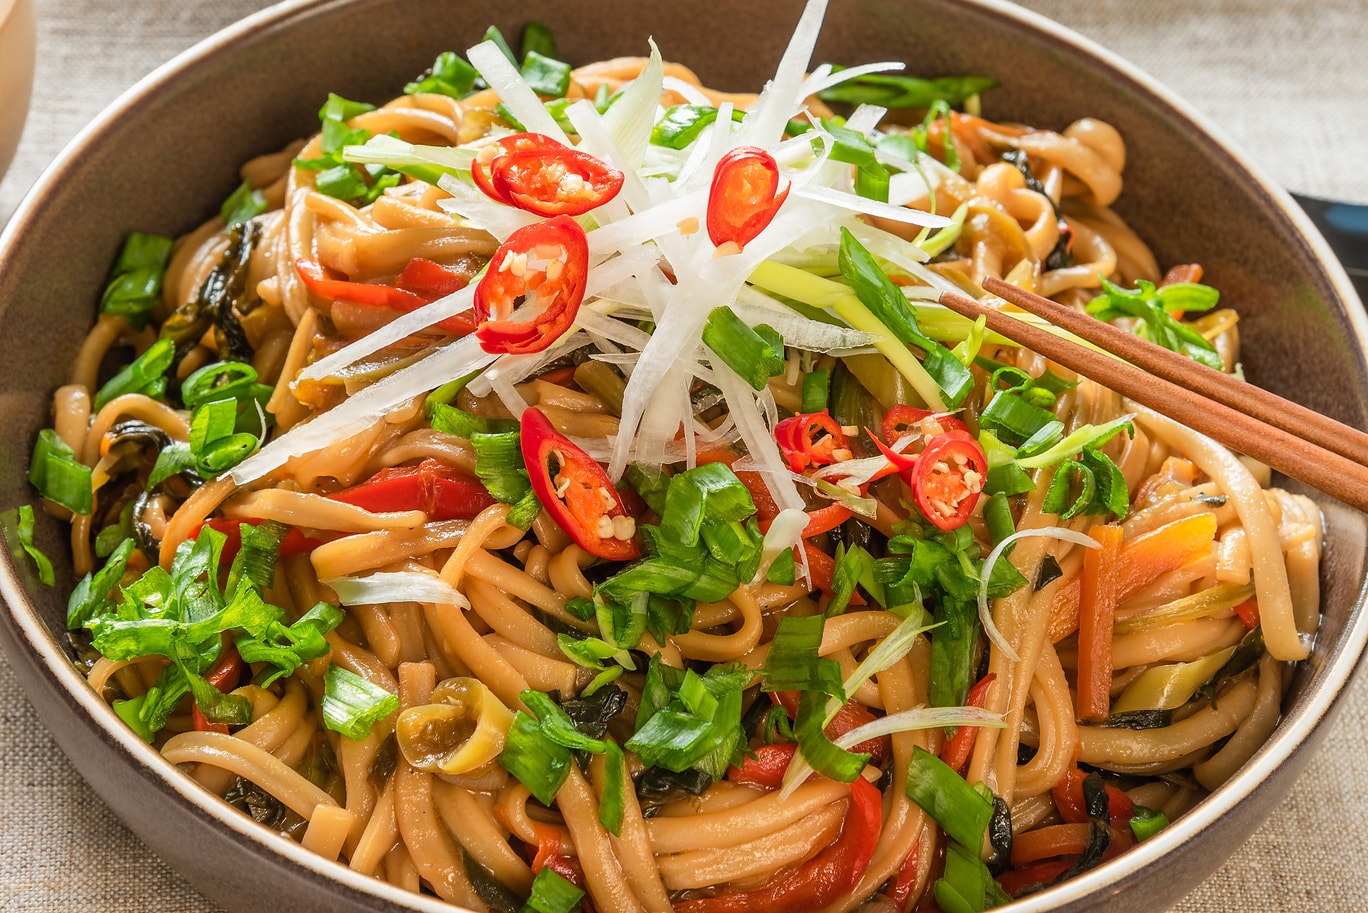 Veggie Chow Mein Noodles with CBD-infused Spicy Peanut Sauce